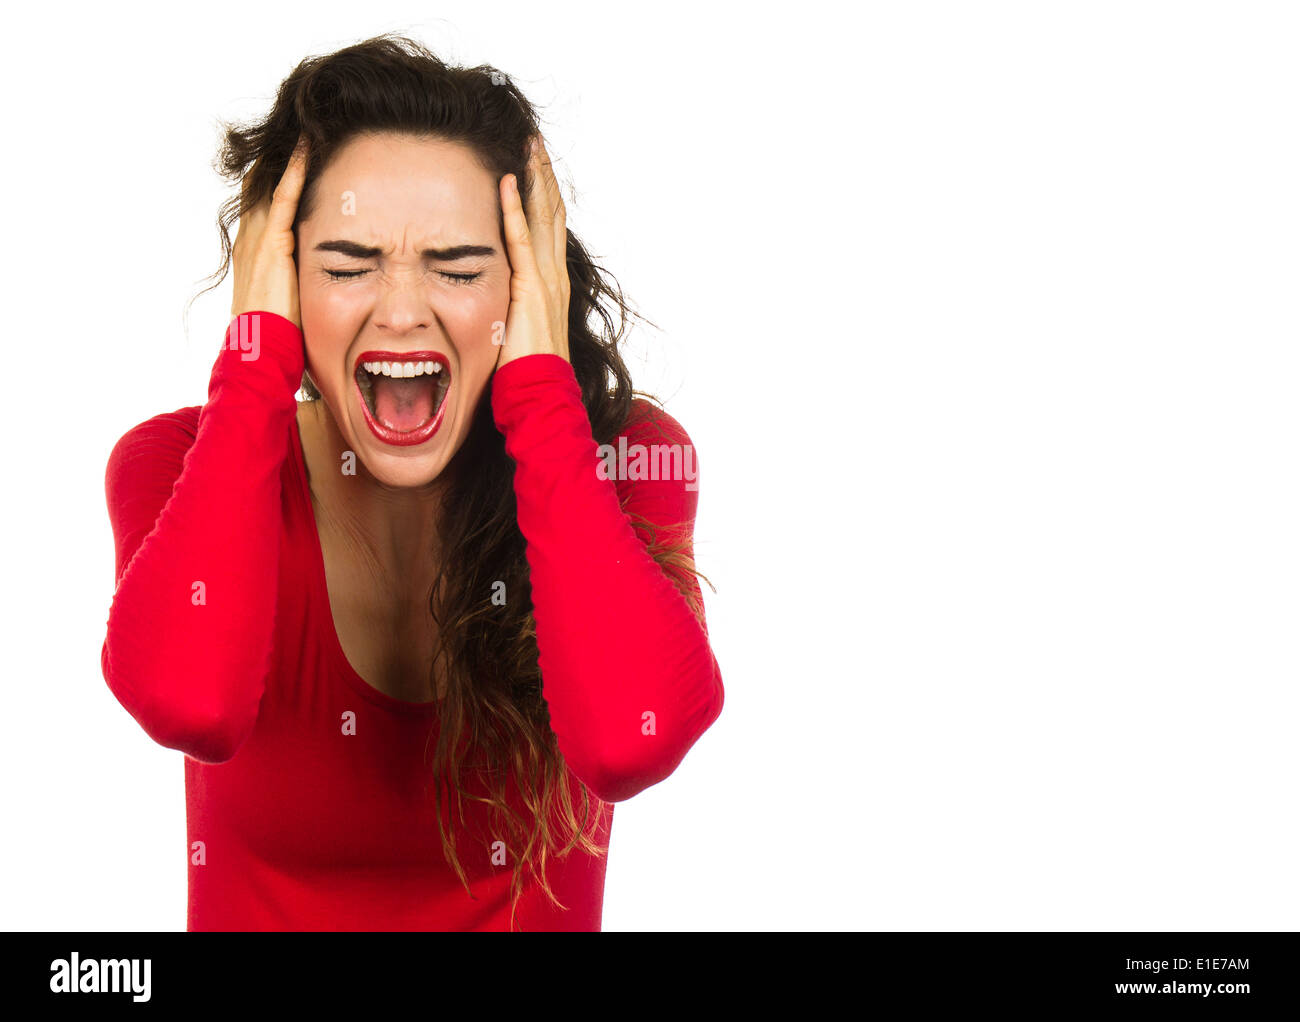 A very angry and frustrated woman screaming and covering her ears. Isolated on white. Stock Photo